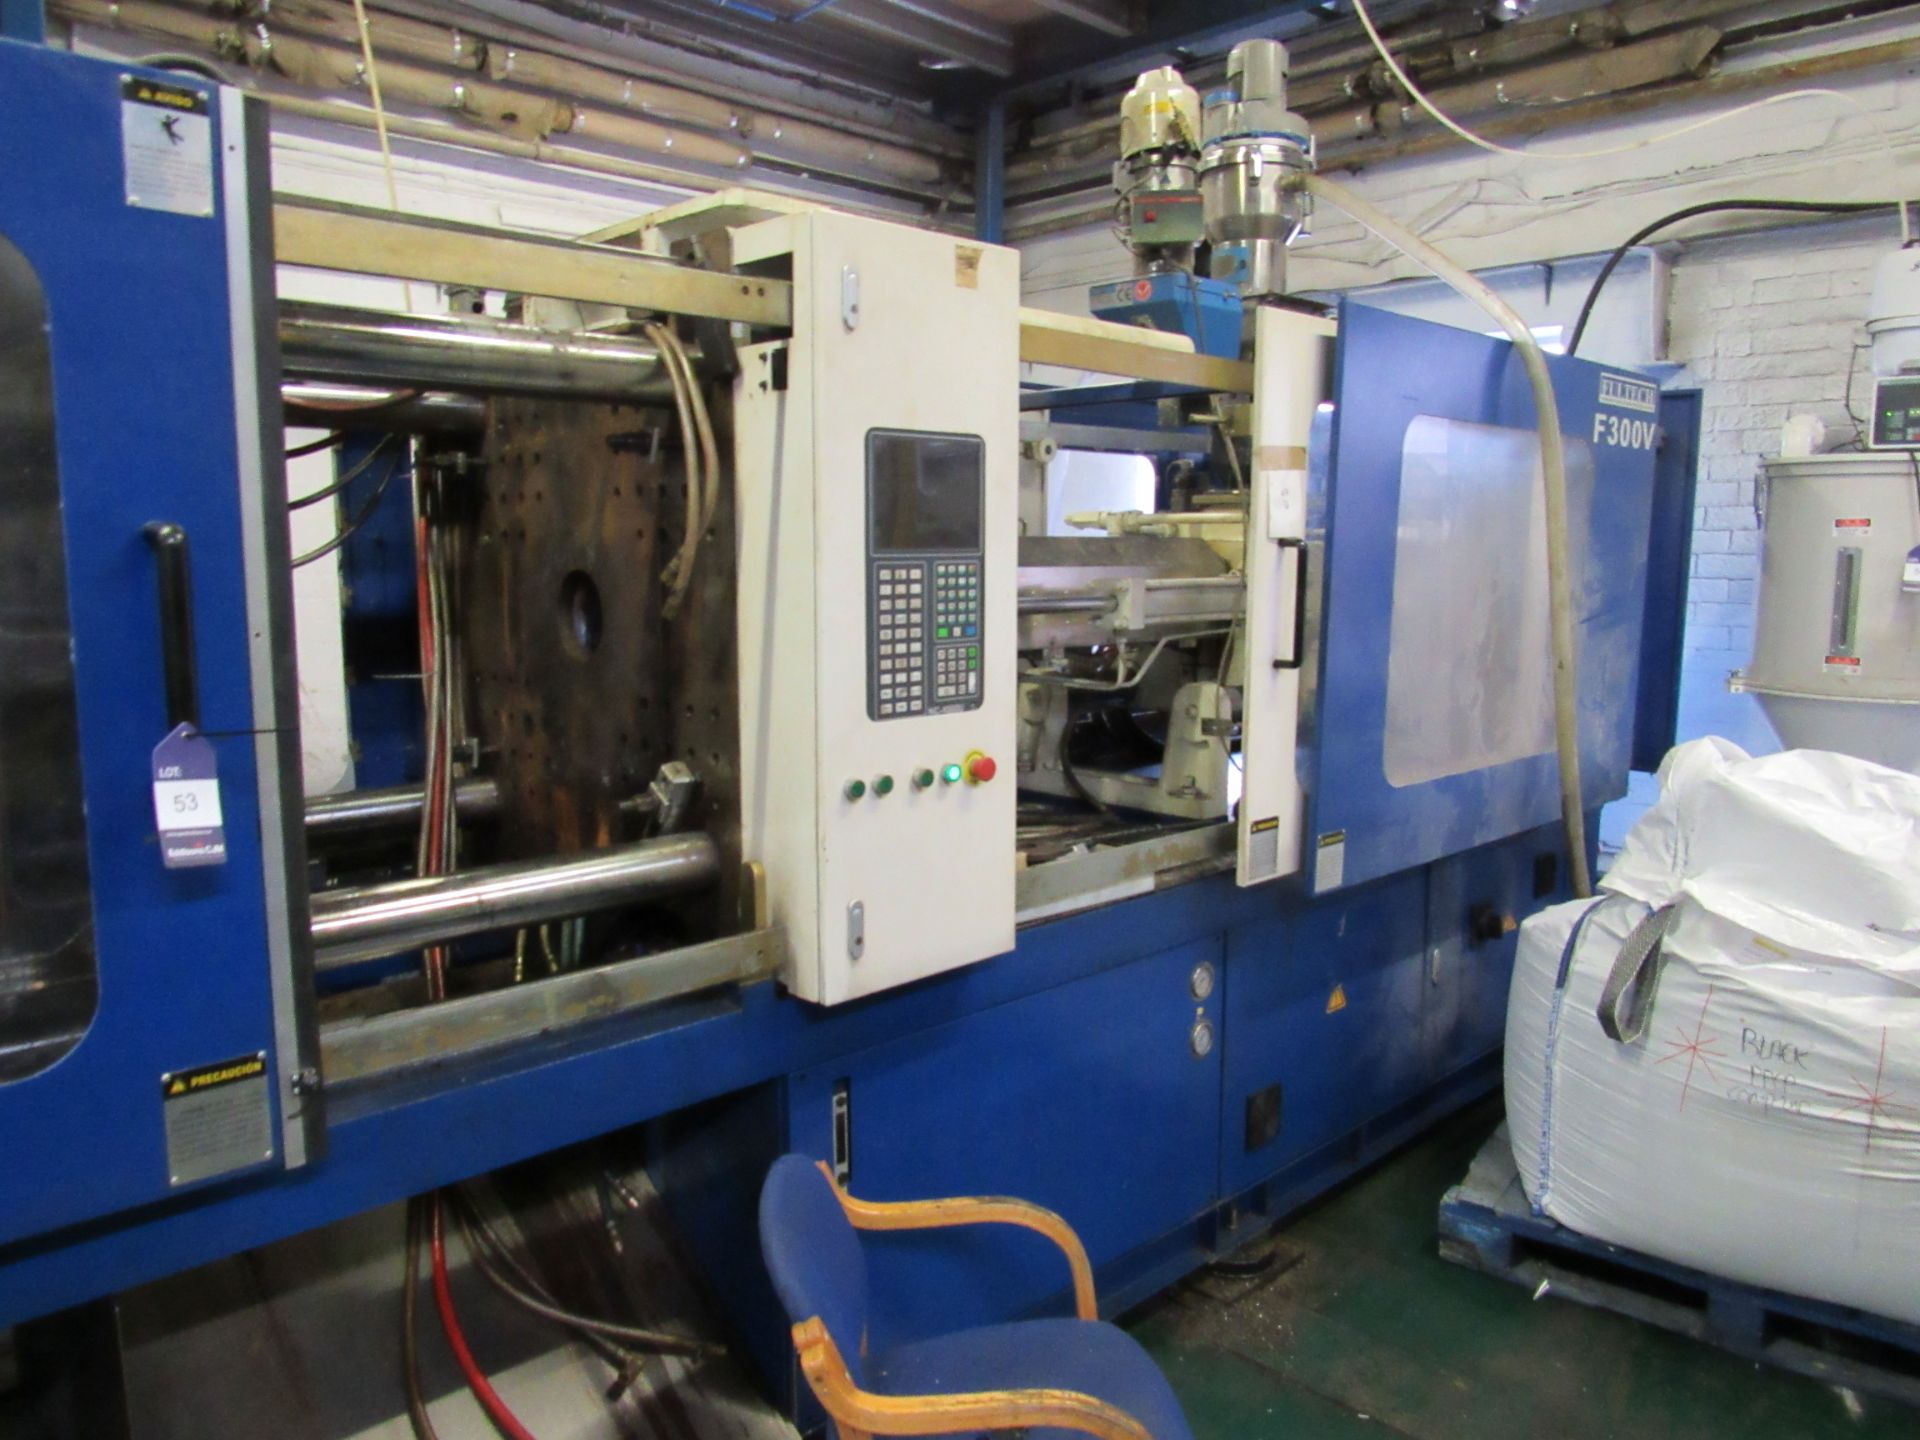 Fultech F300V Injection Moulding Machine, 3000KN, Serial 30B1100, 1280cm Cube, March 2012 with MTA - Image 2 of 9